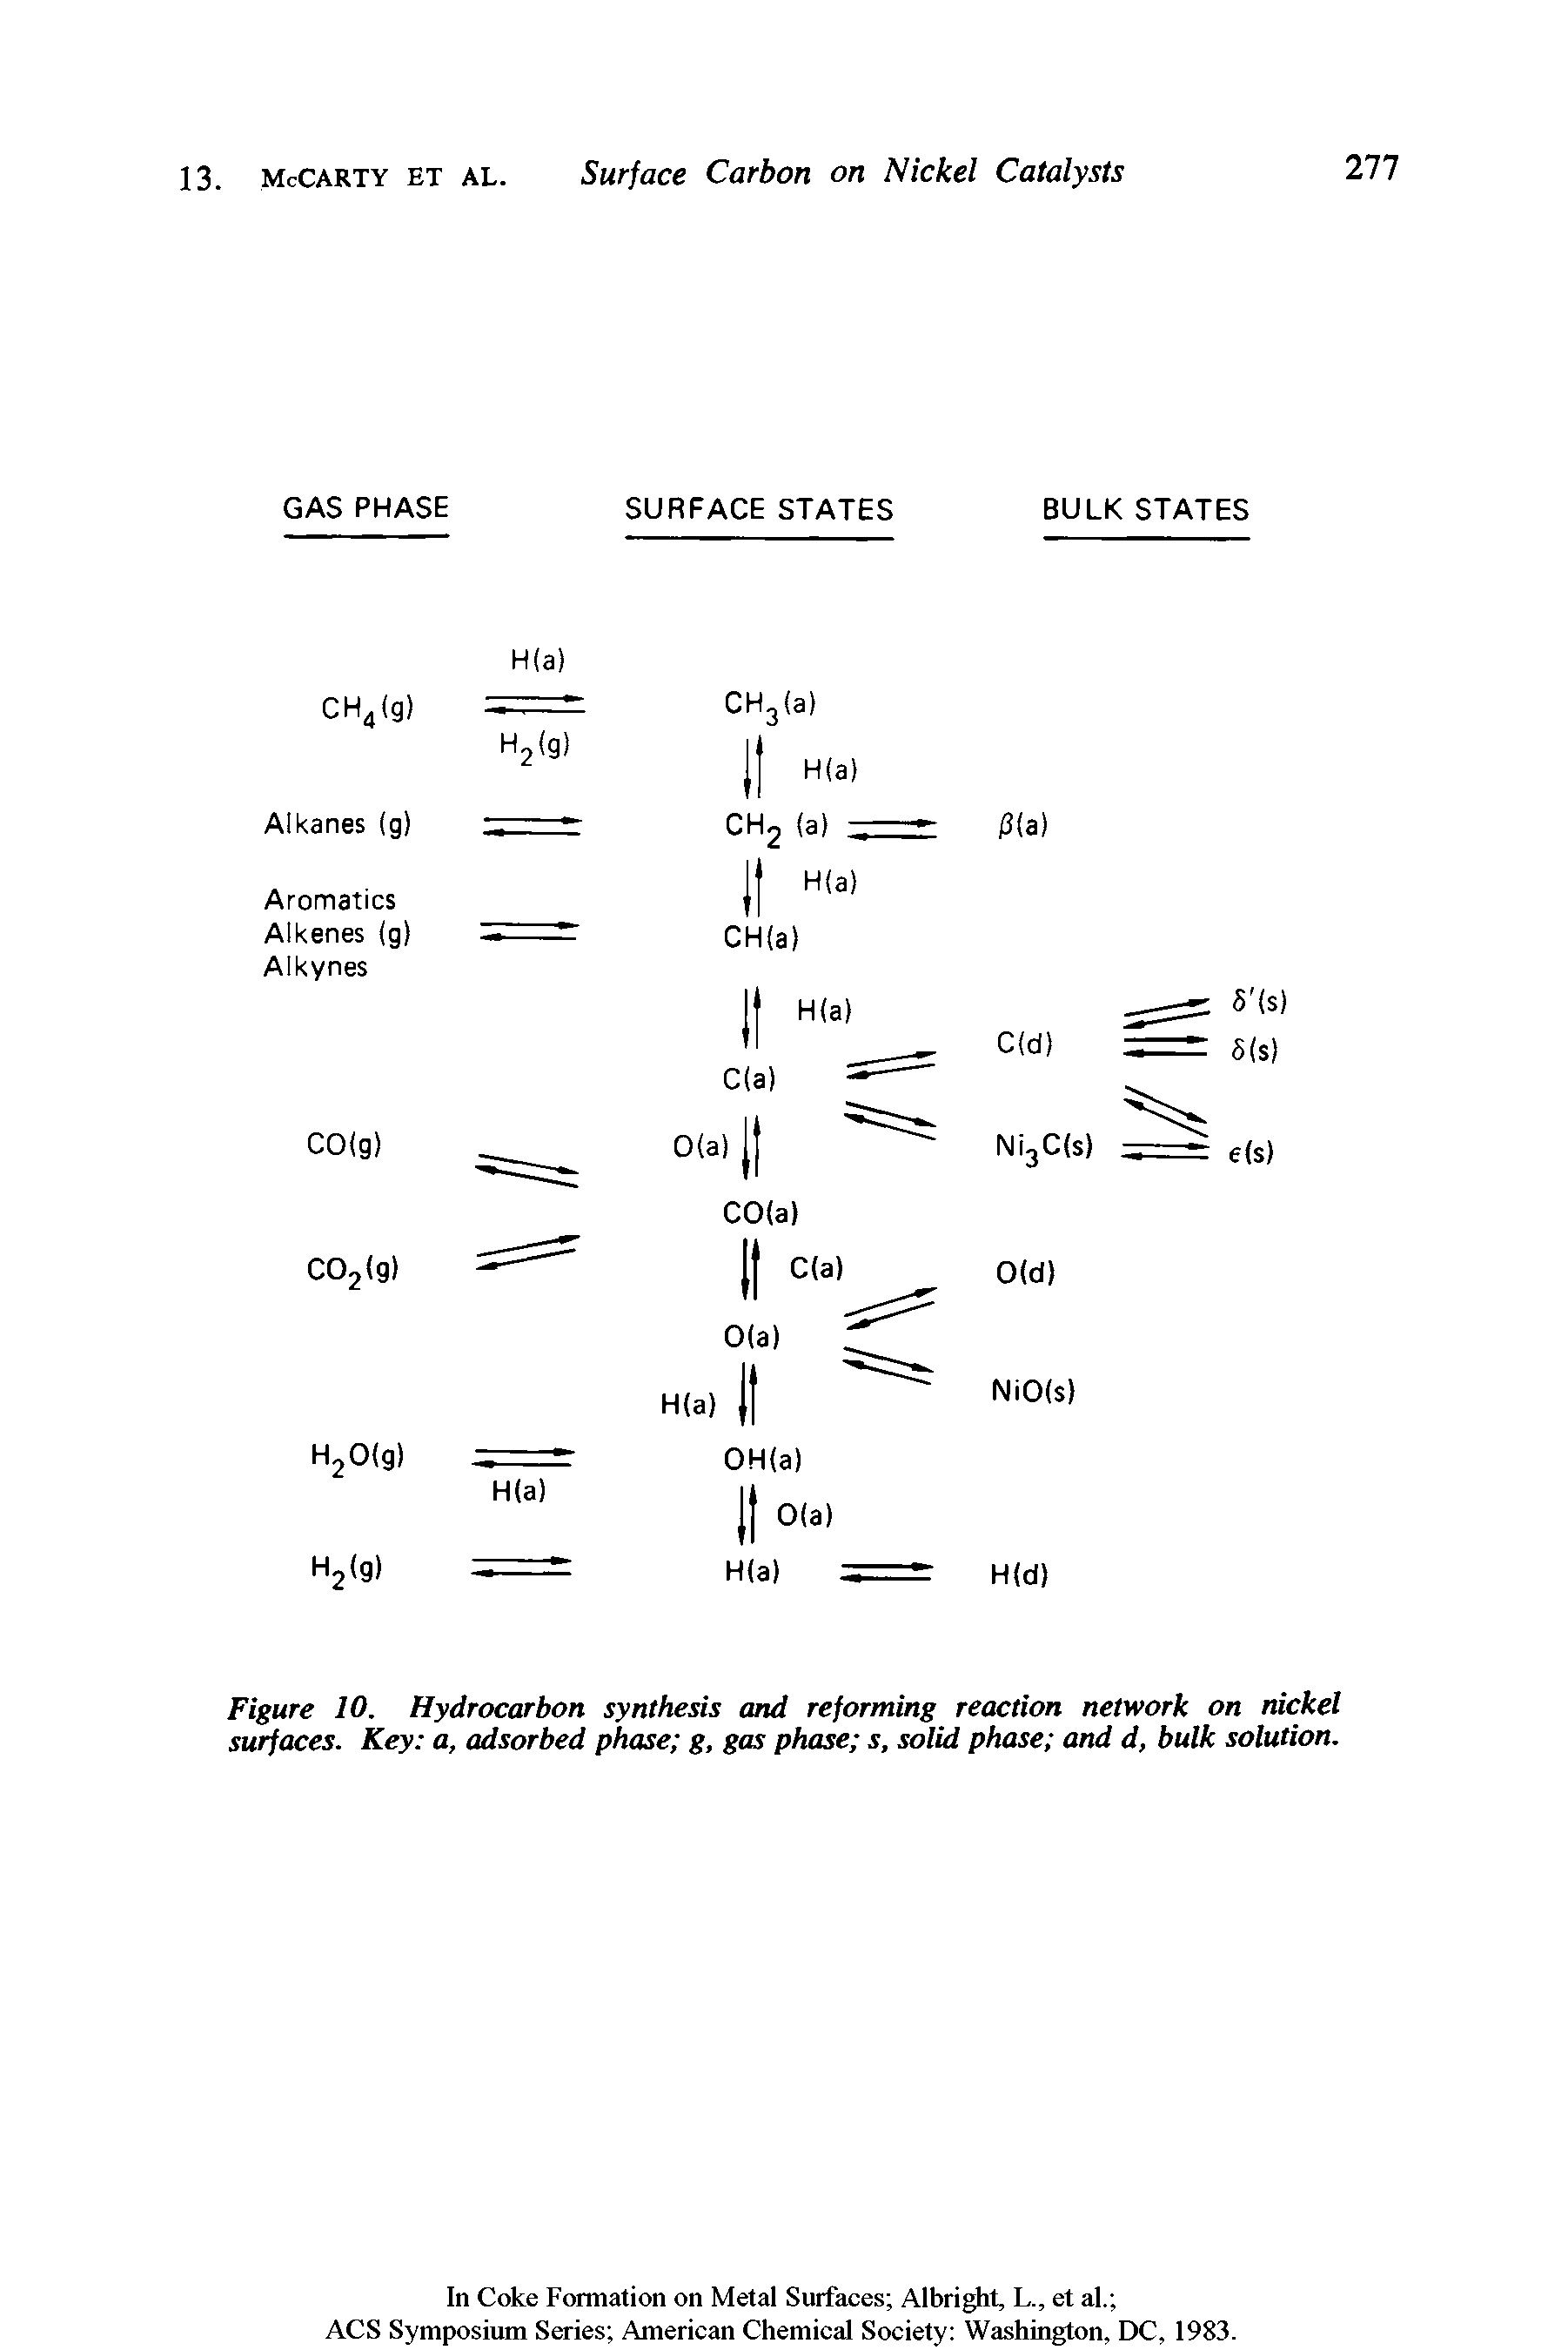 Figure 10. Hydrocarbon synthesis and reforming reaction network on nickel surfaces. Key a, adsorbed phase g, gas phase s, solid phase and d, bulk solution.